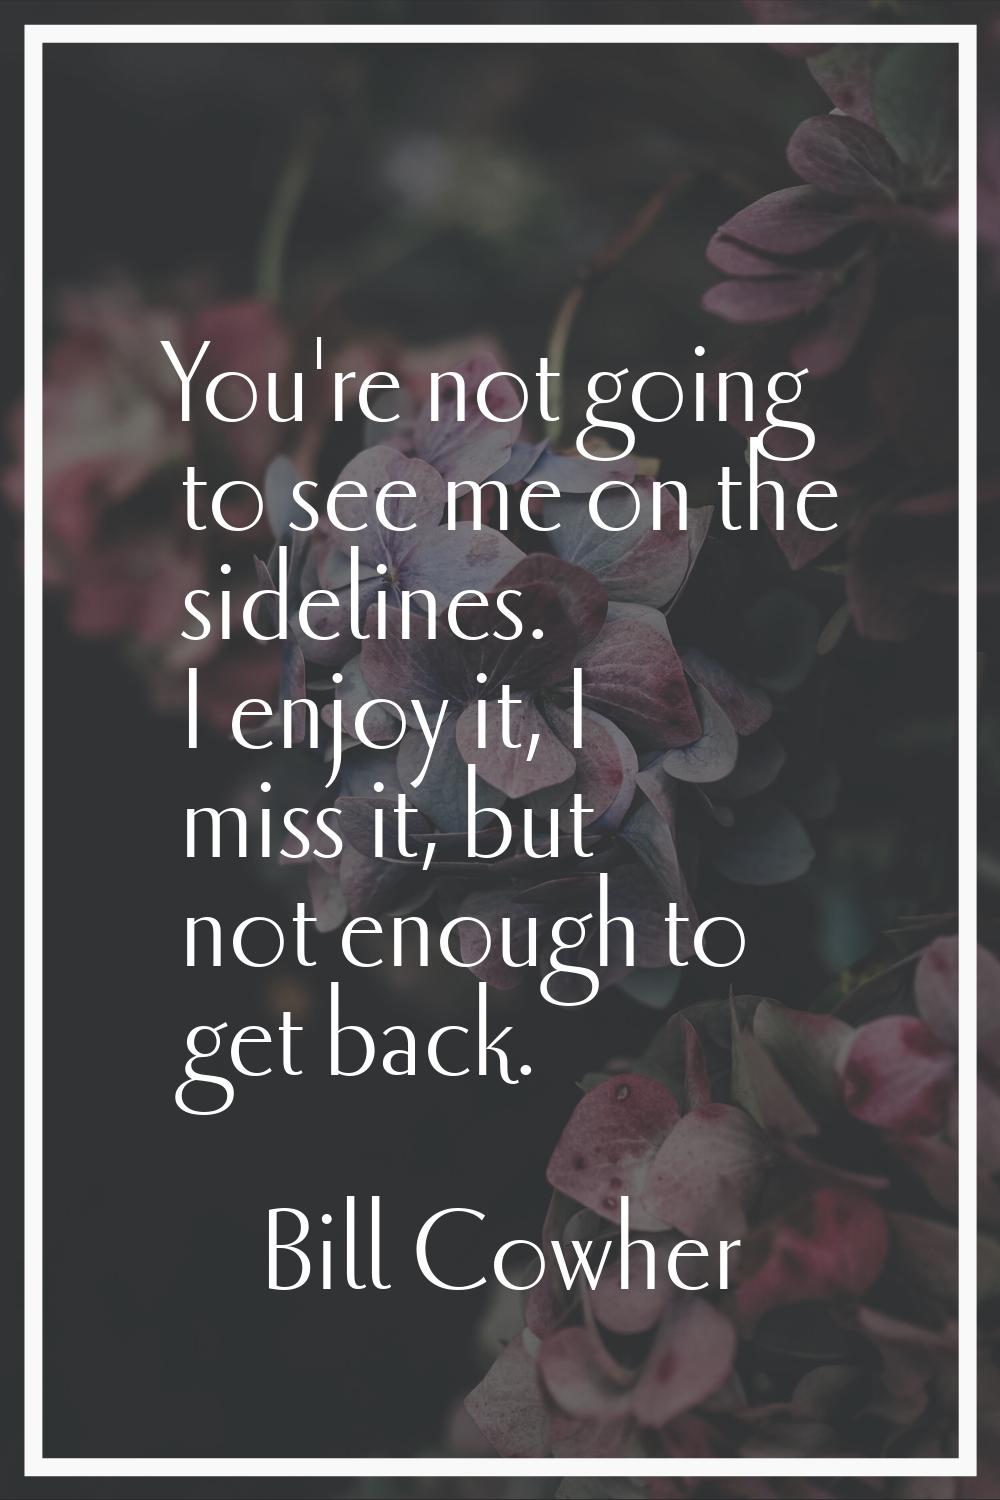 You're not going to see me on the sidelines. I enjoy it, I miss it, but not enough to get back.